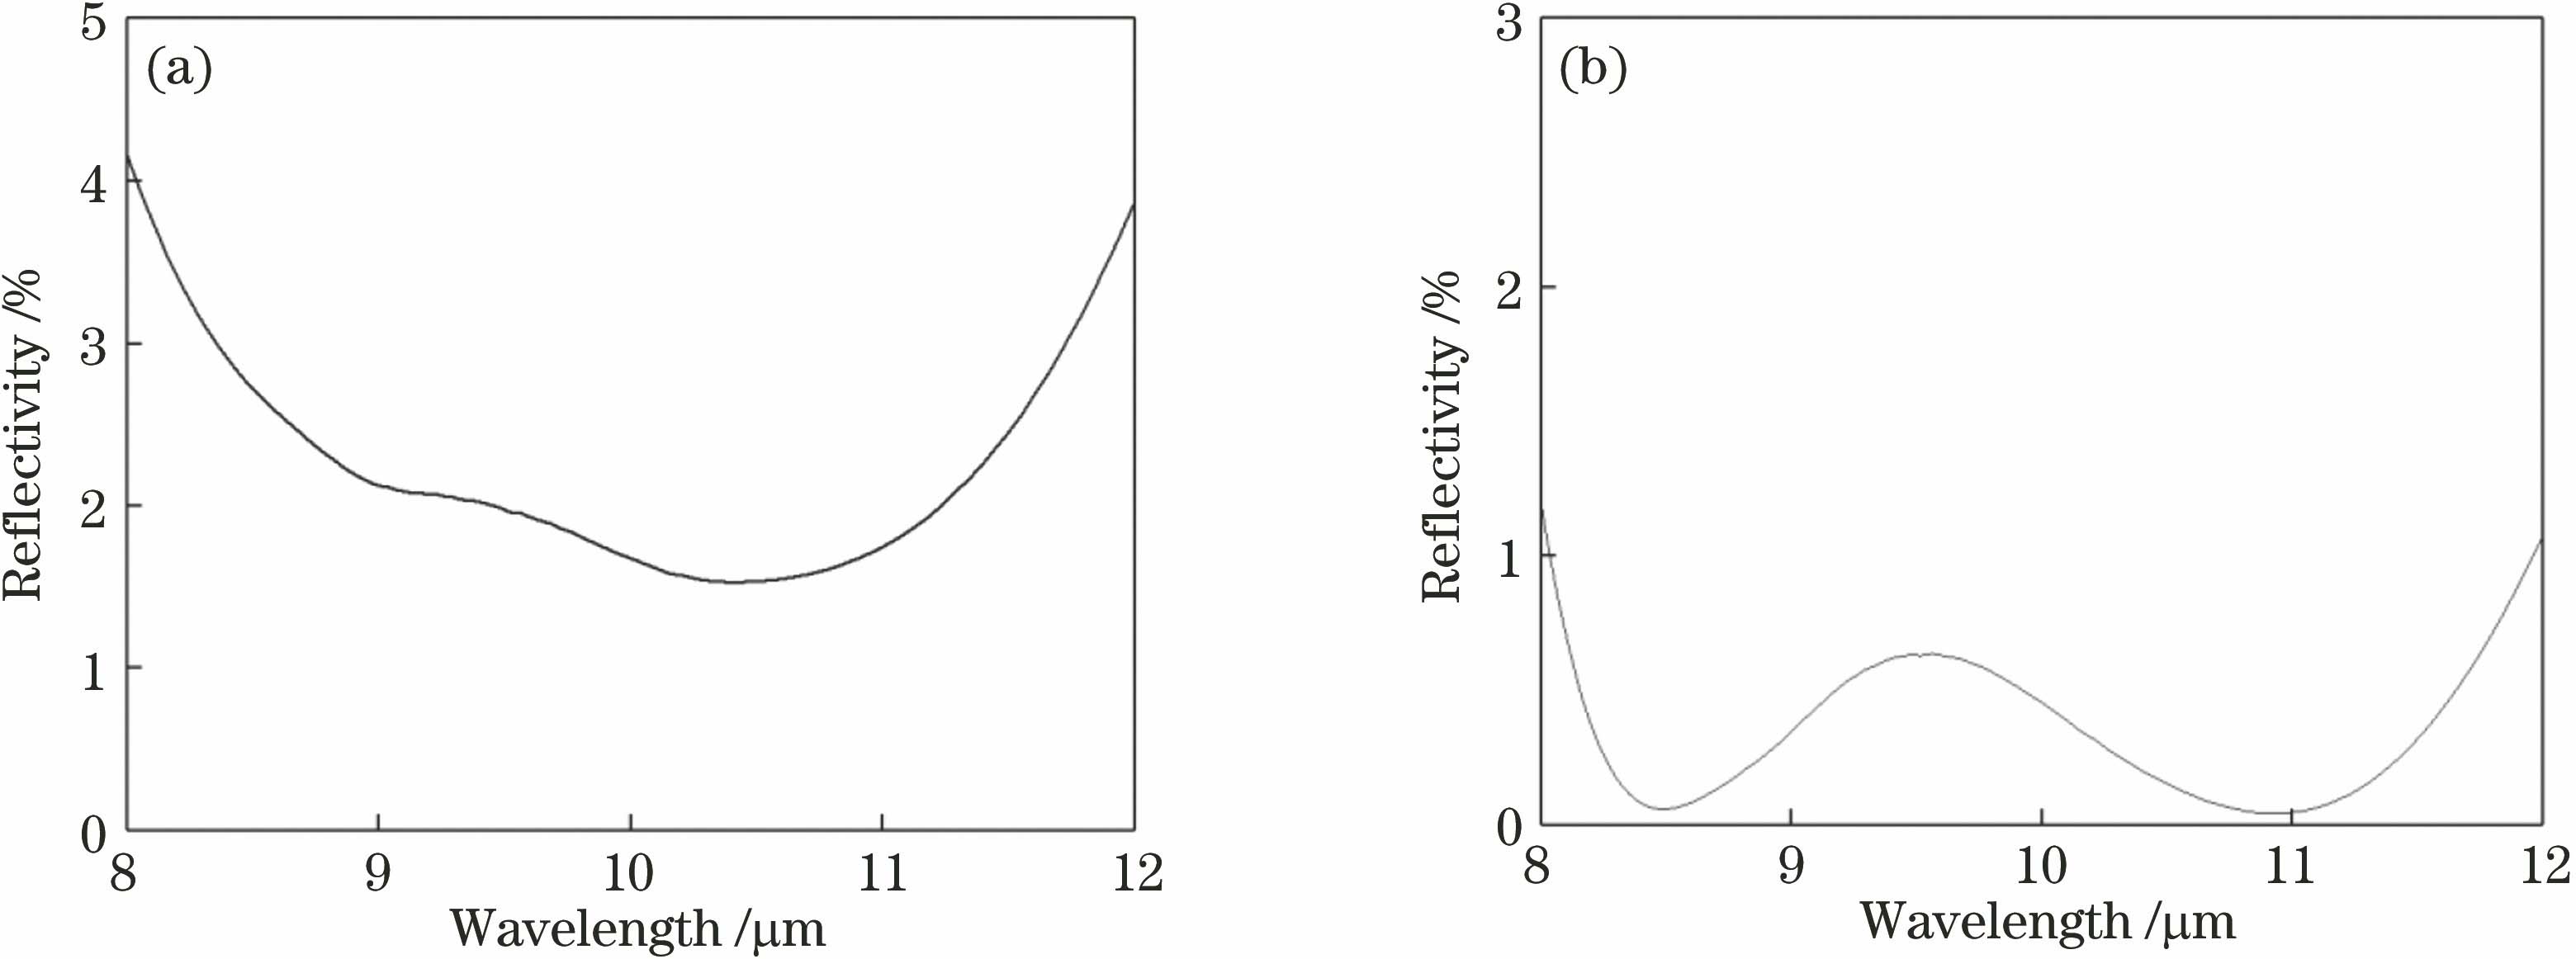 Theoretical reflectivity after optimization. (a) Anti-reflection protective film; (b) anti-reflection film